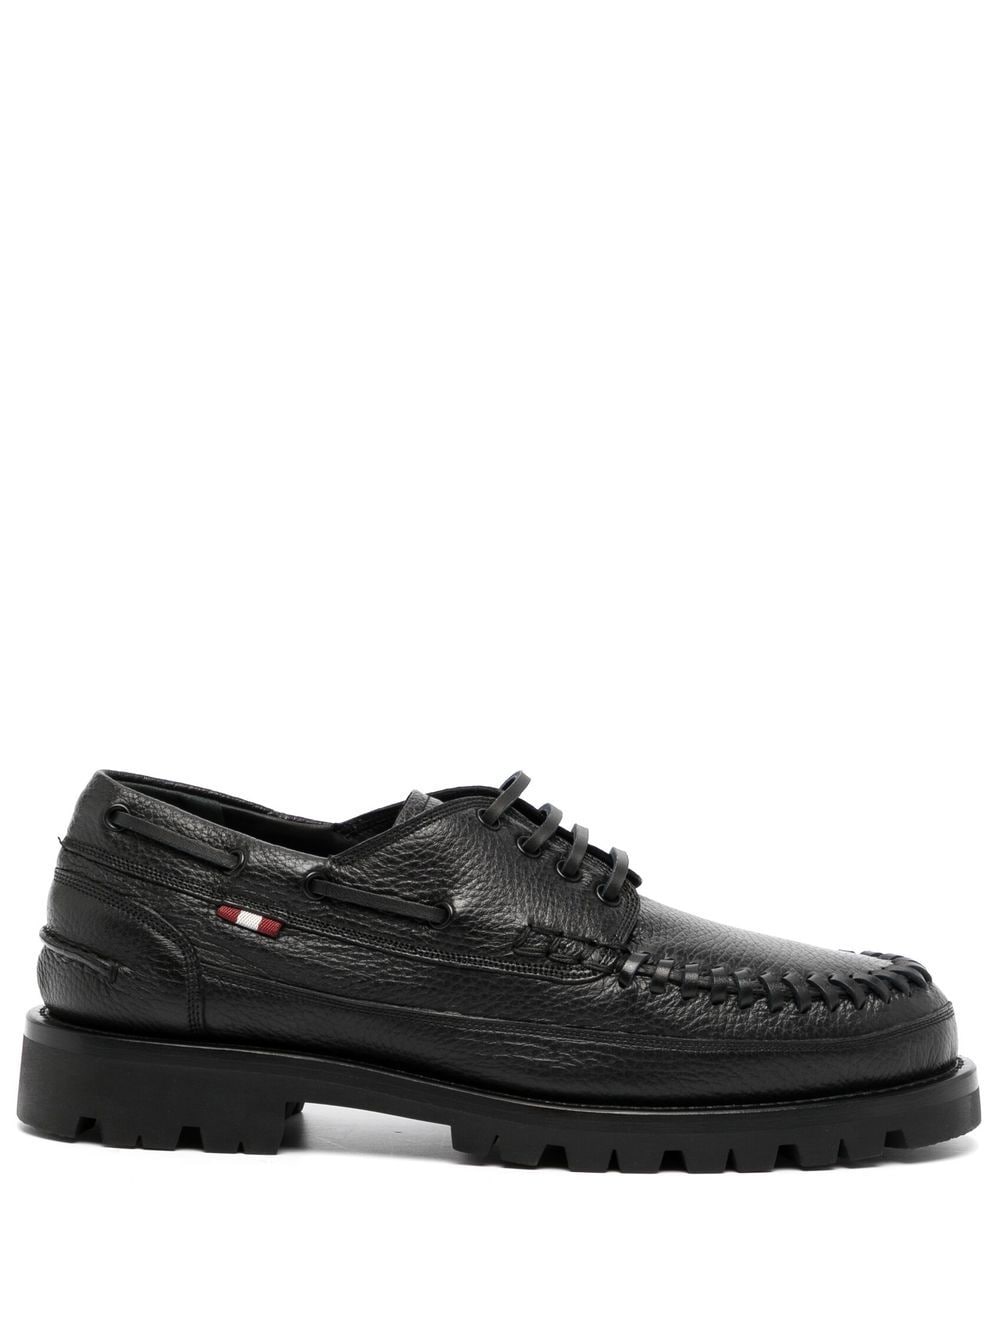 Bally Leather Ridged Derby-shoes In Black